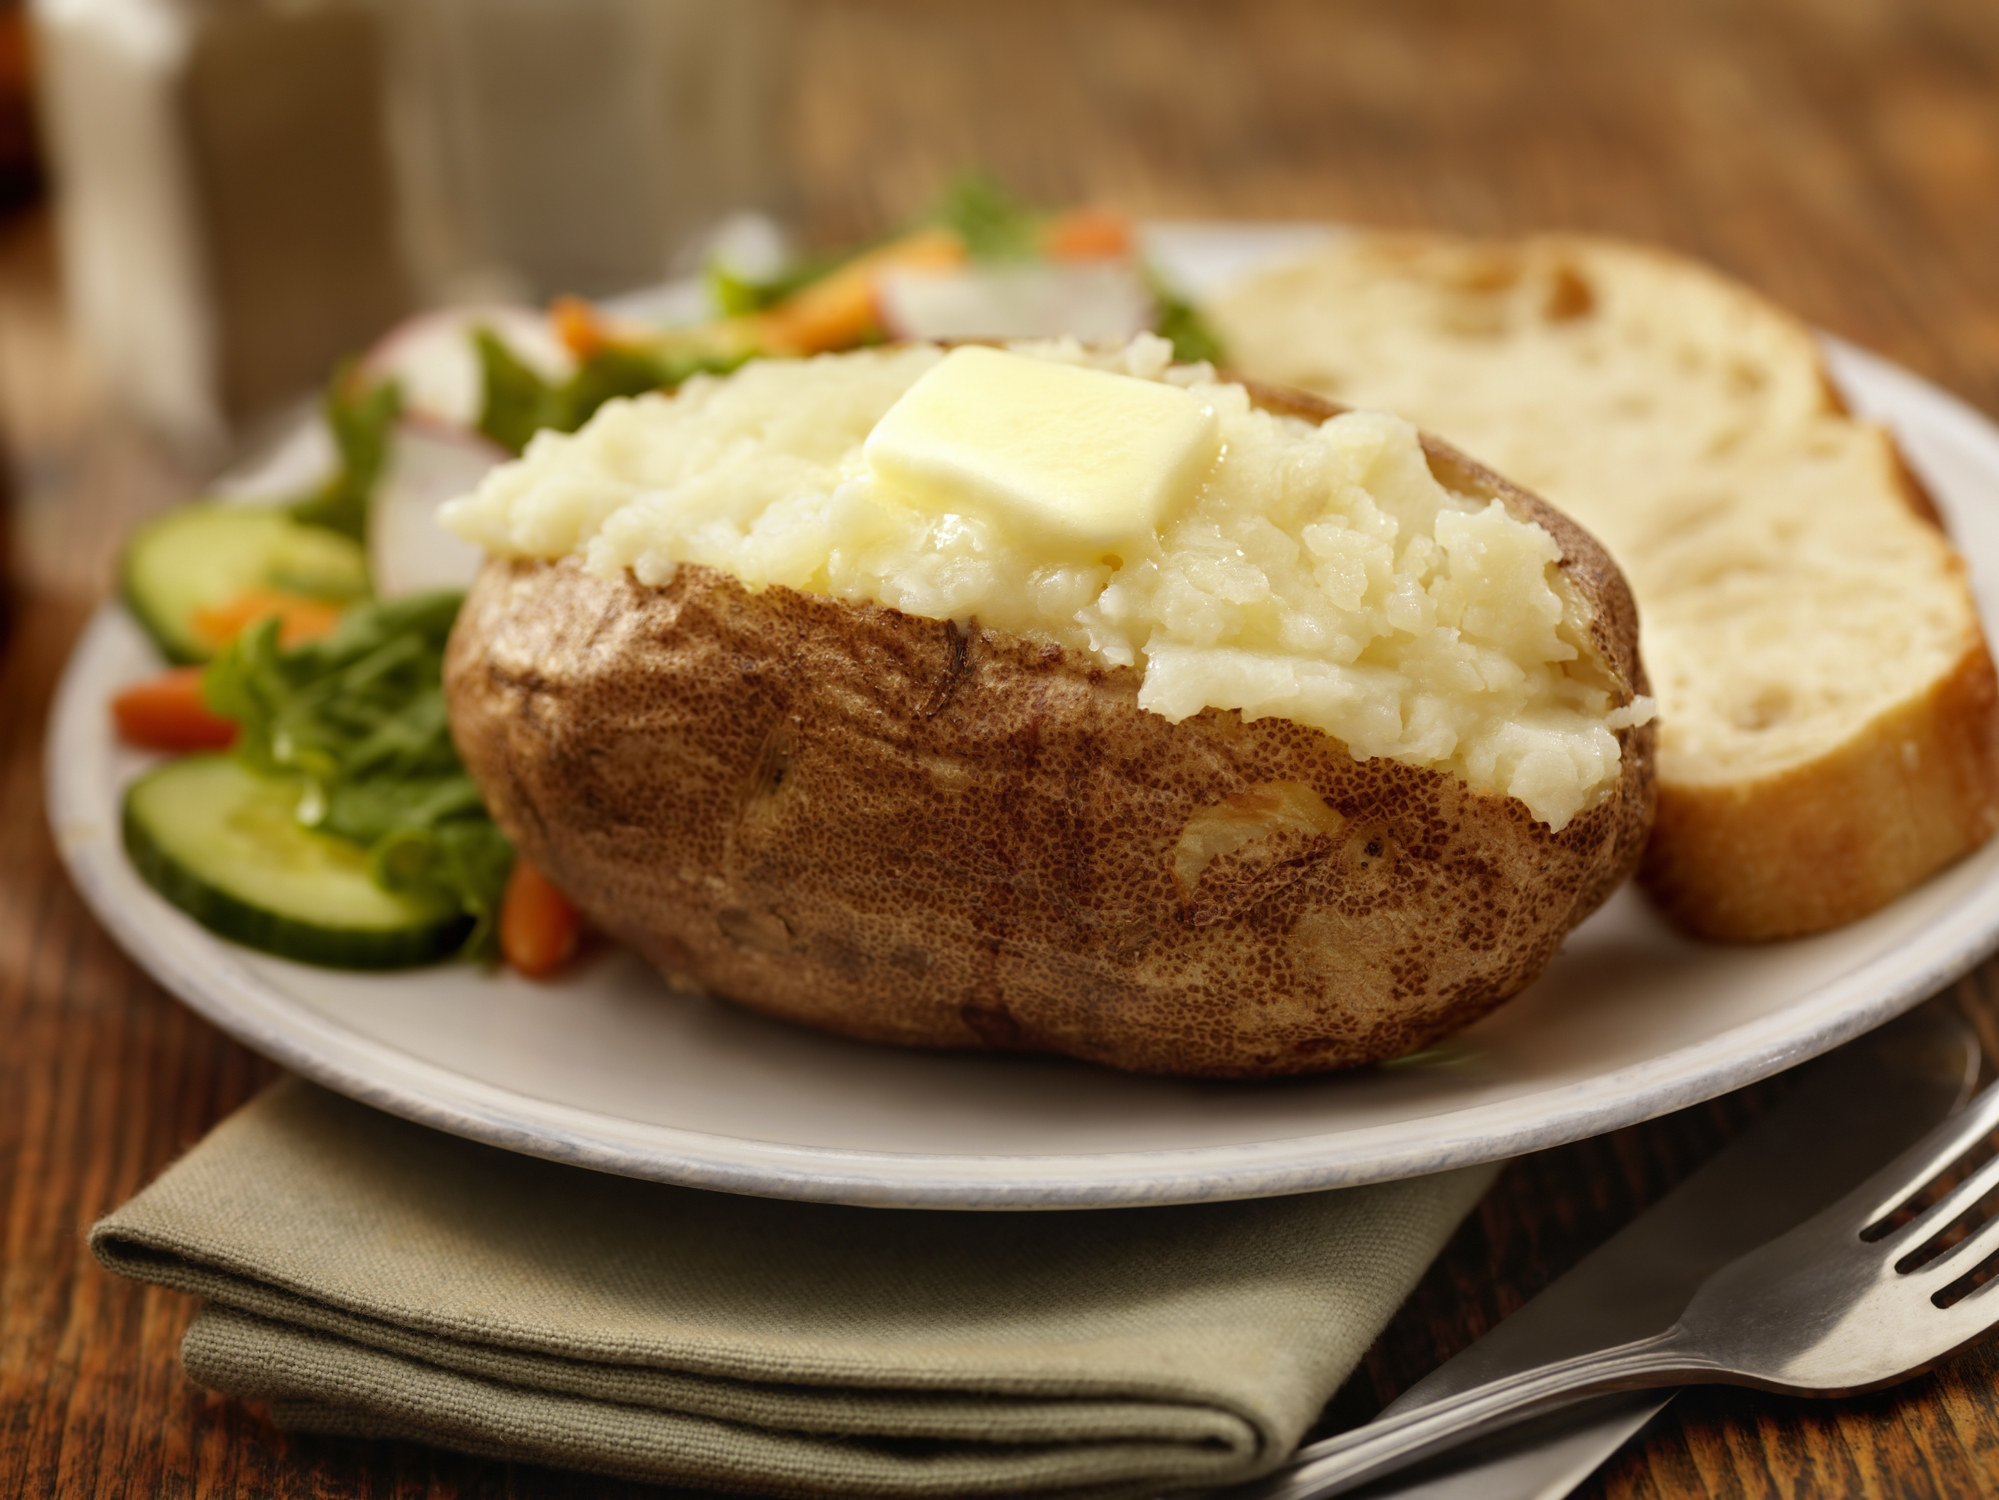 A baked potato with butter.